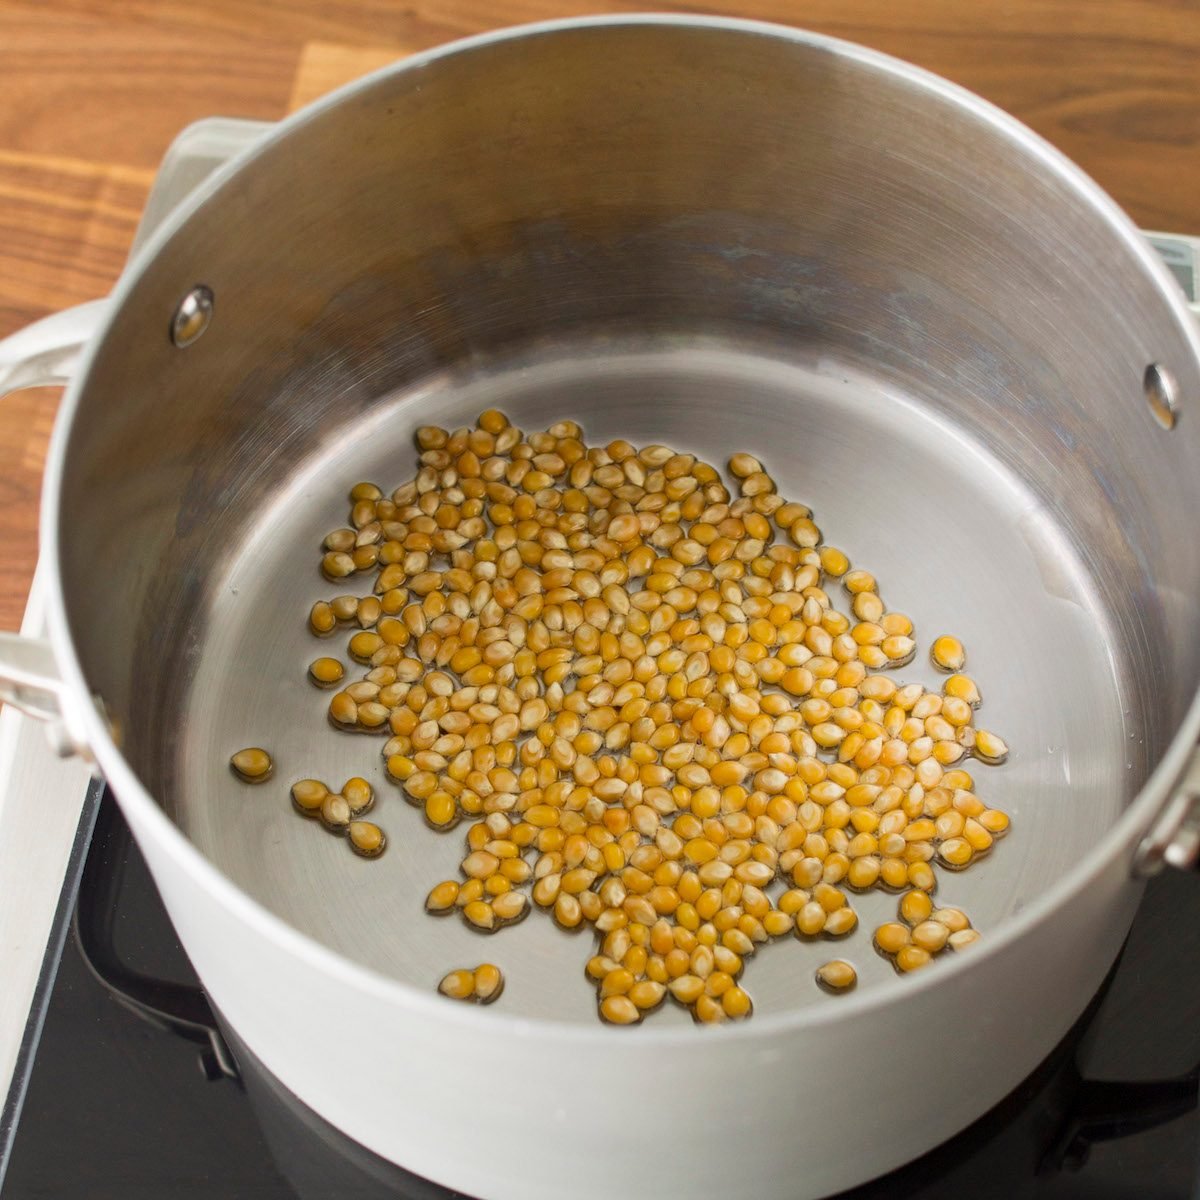  How to Make Popcorn on the Stove